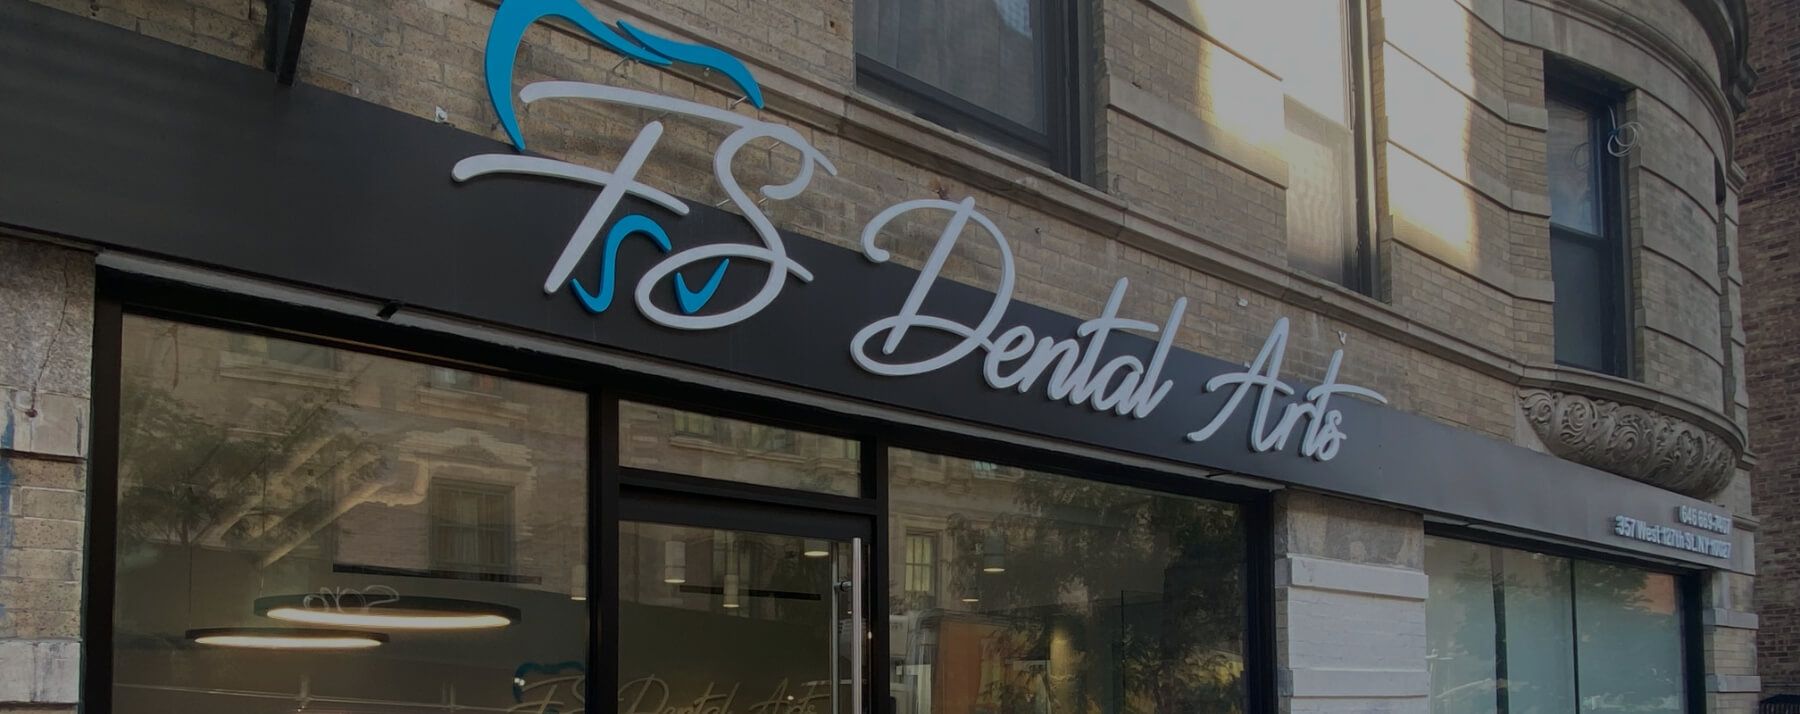 Outside view of F S Dental Arts in New York City